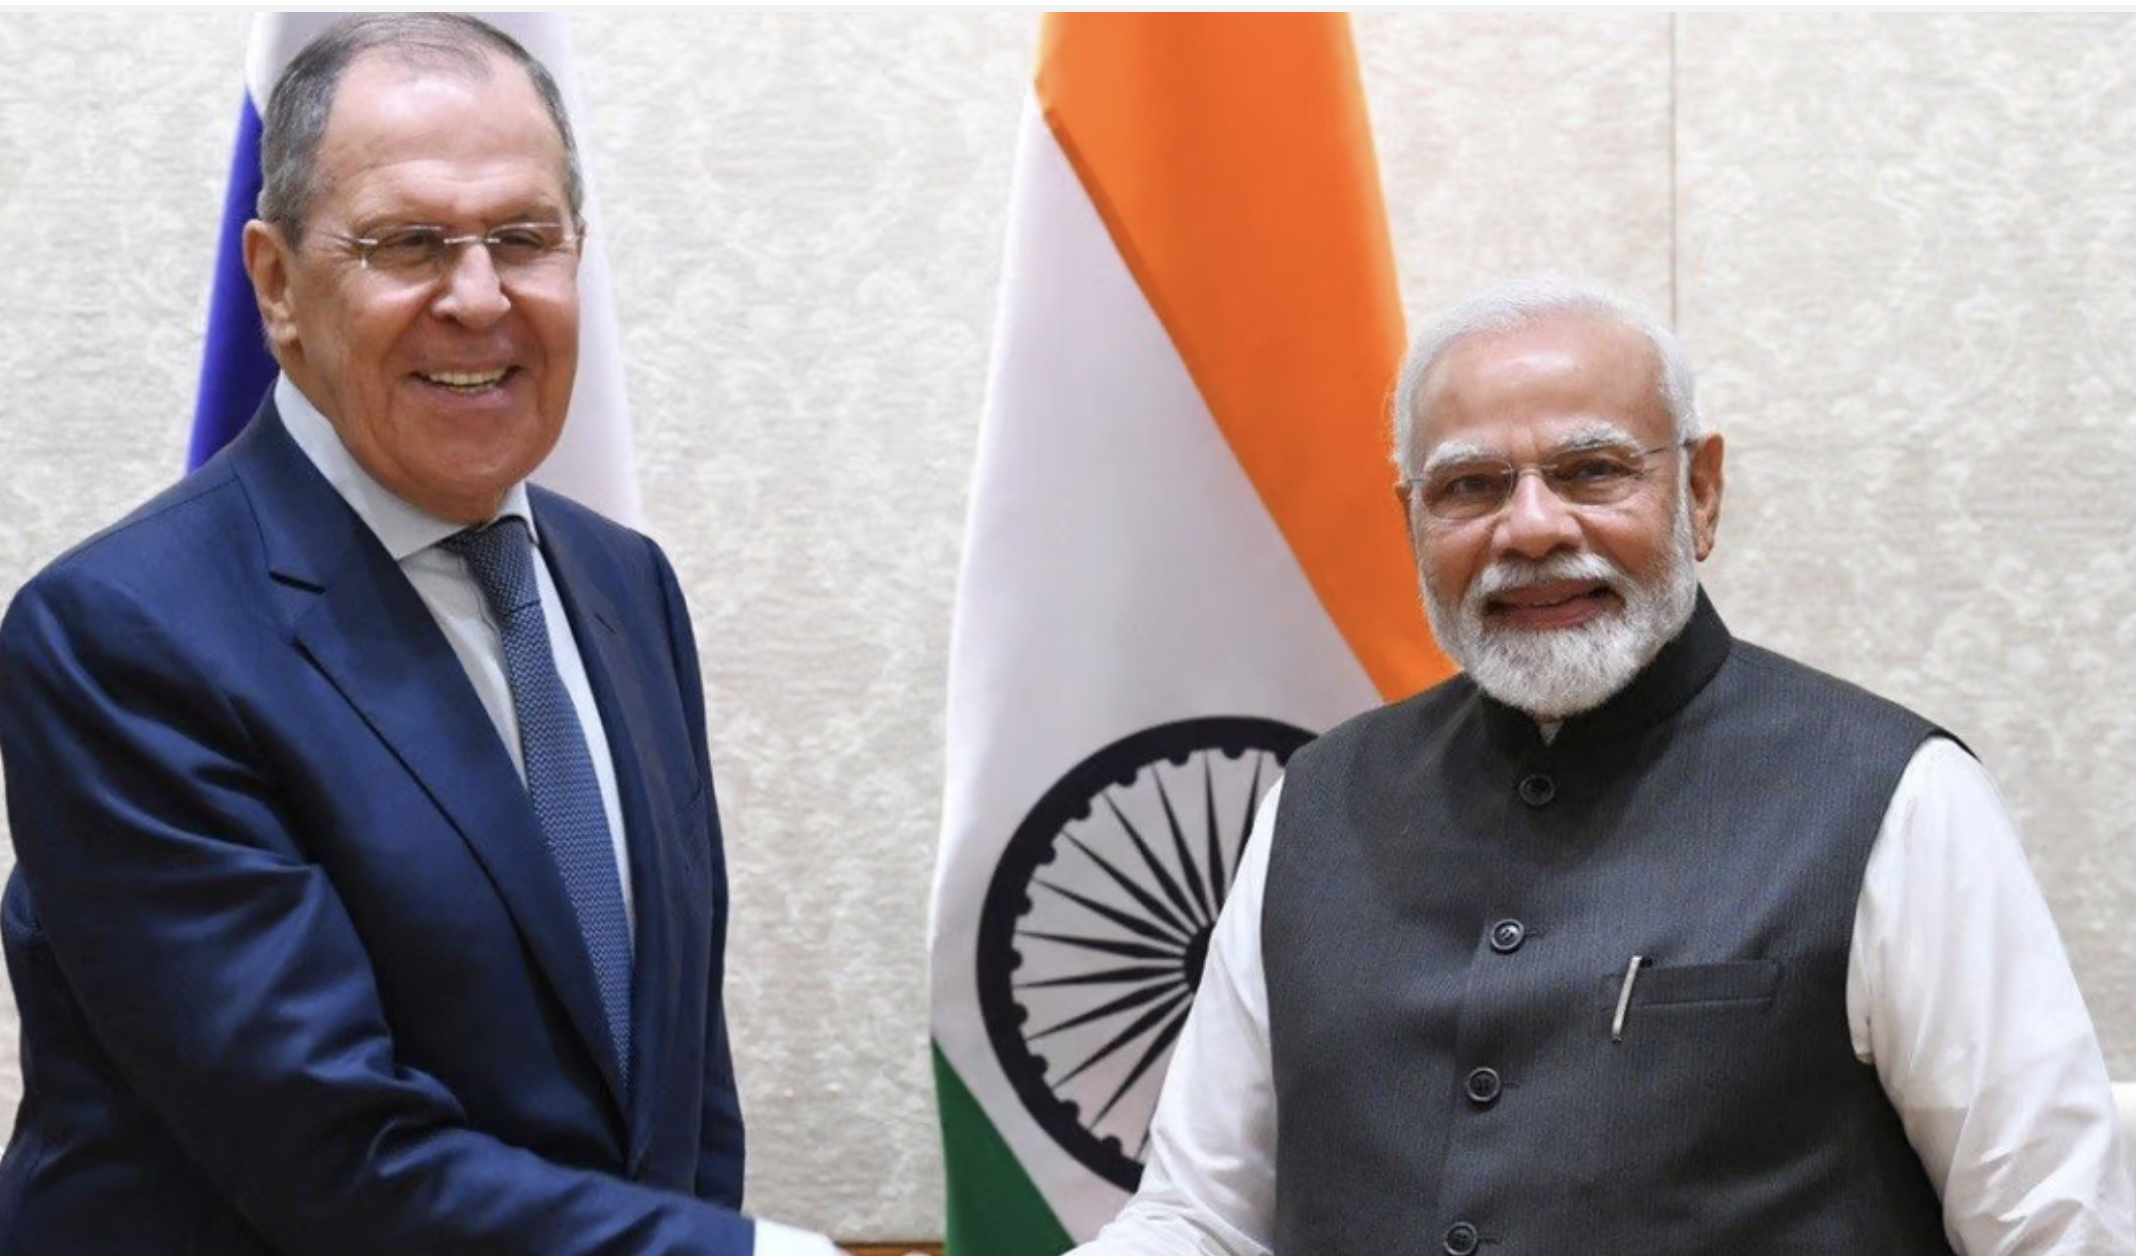 Russian Foreign Minister Sergei Lavrov meets Indian Prime Minister Narendra Modi on April 1 in New Delhi.png